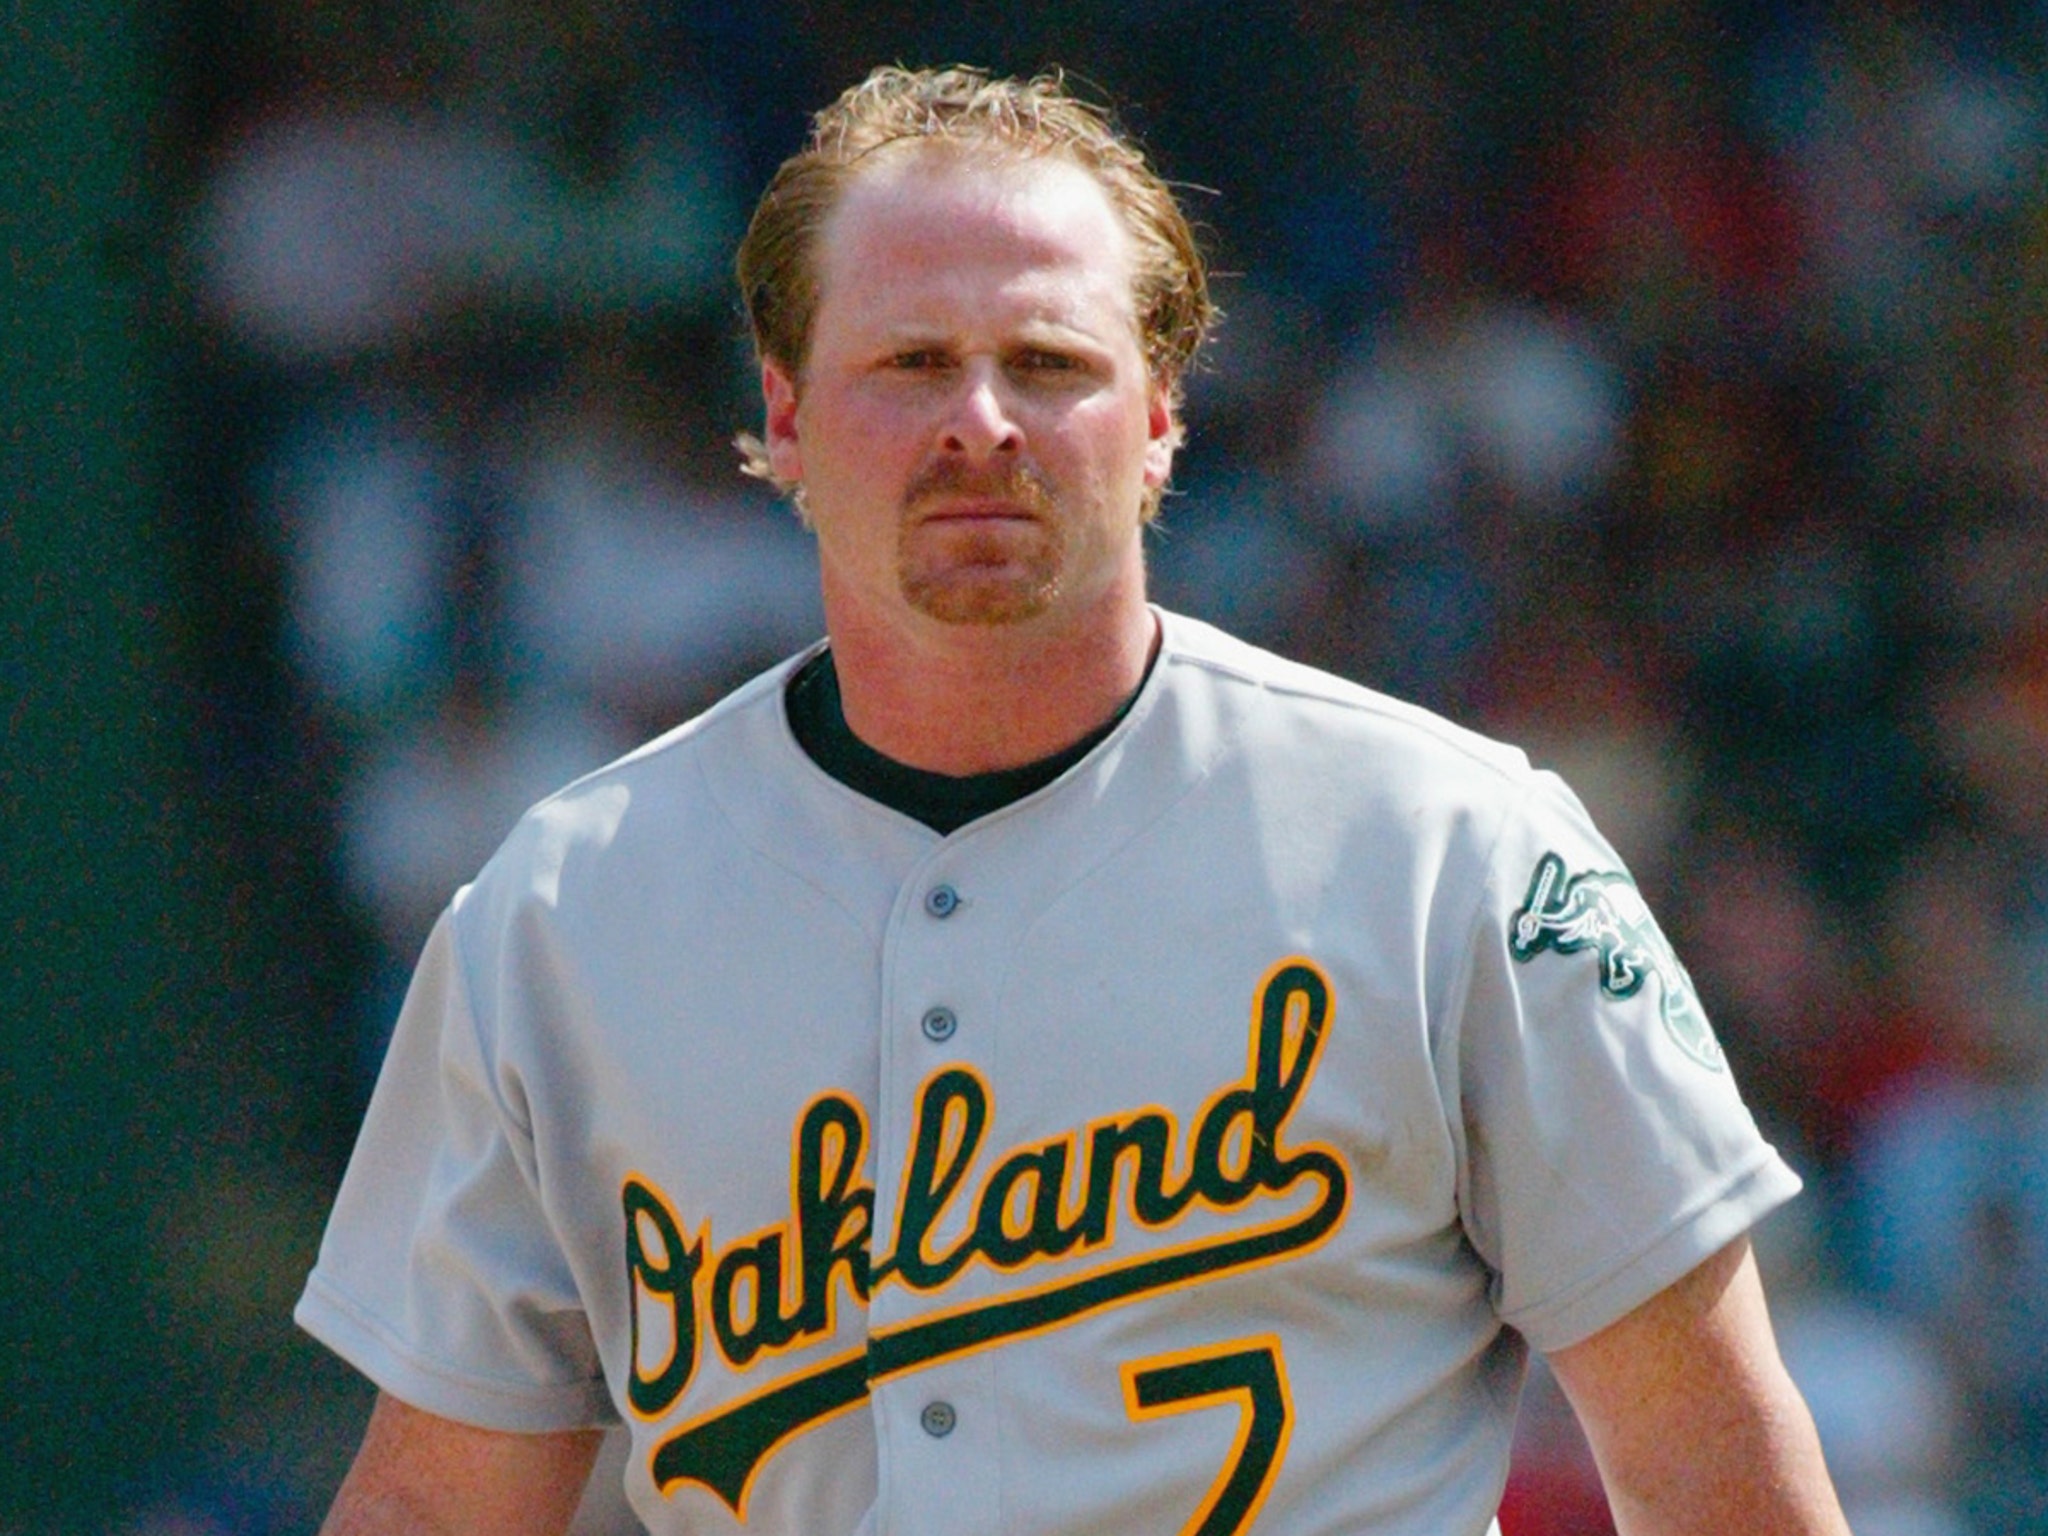 Jeremy Giambi Suffered a Head Injury 6 Months Before His Death